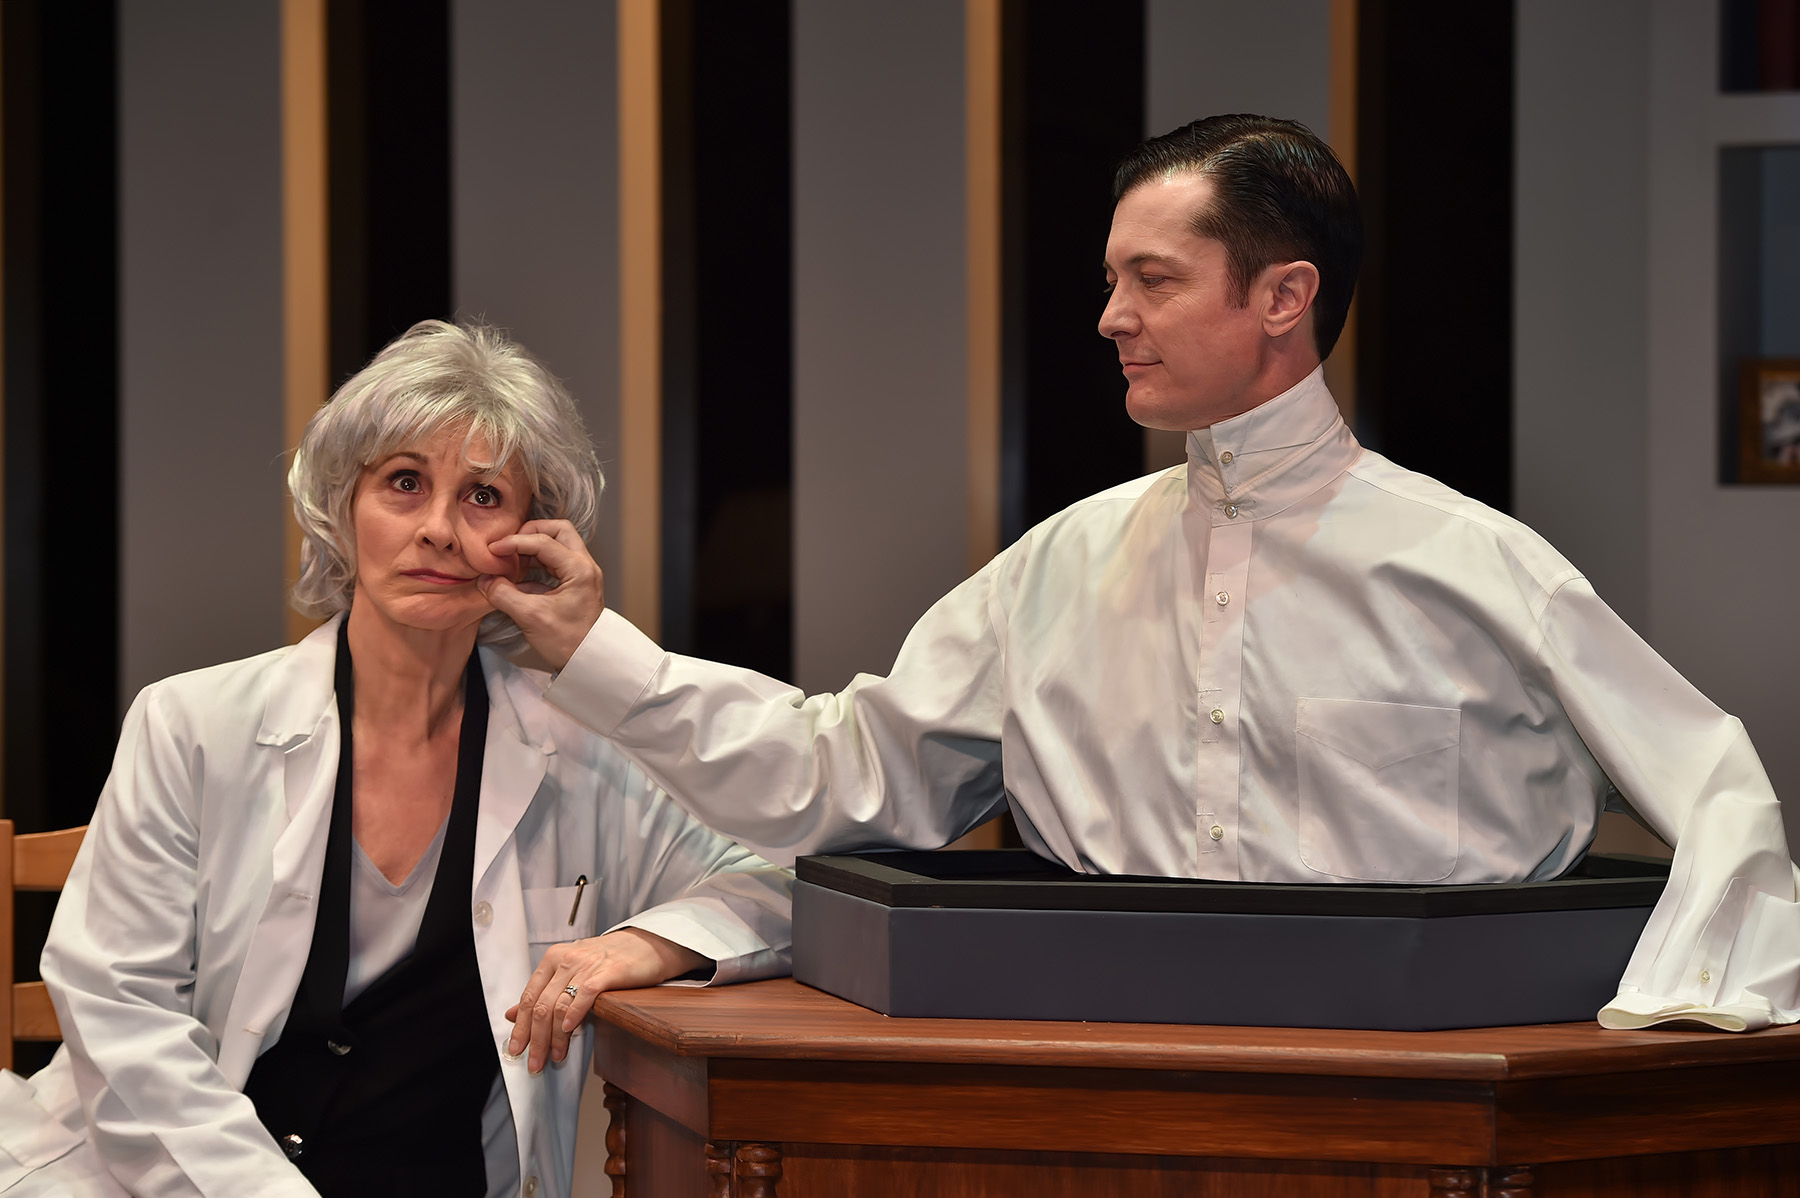 Susan Denaker and Jacob Sidney star in the Uncanny Valley, directed by Caryn Desai at the International City Theatre in Long Beach.